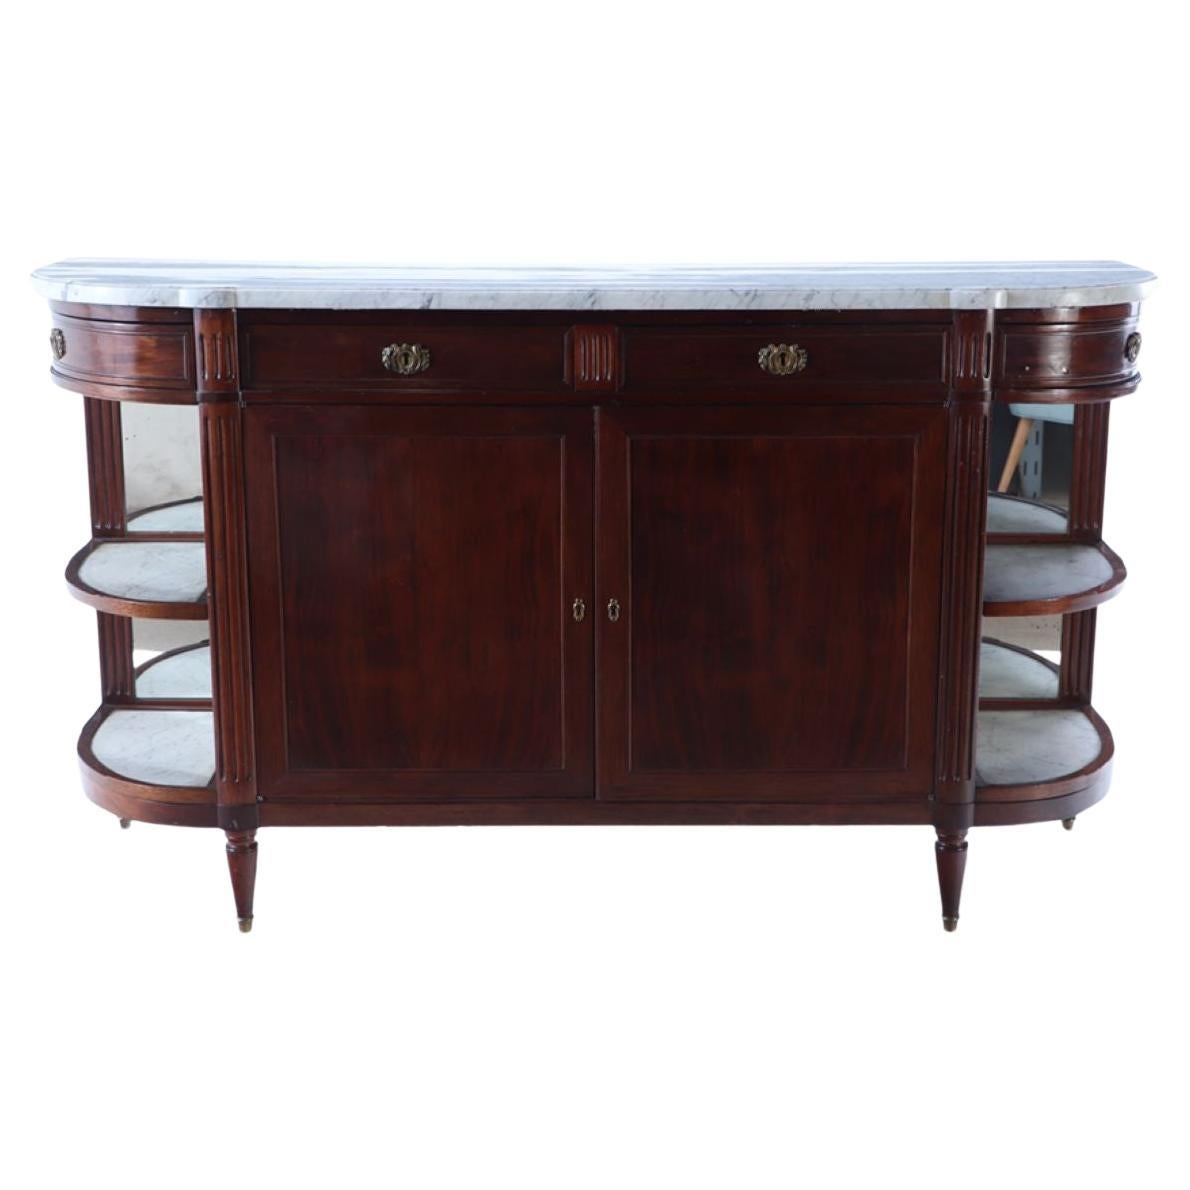 A French mahogany sideboard circa 1920 having a white marble top with open sides